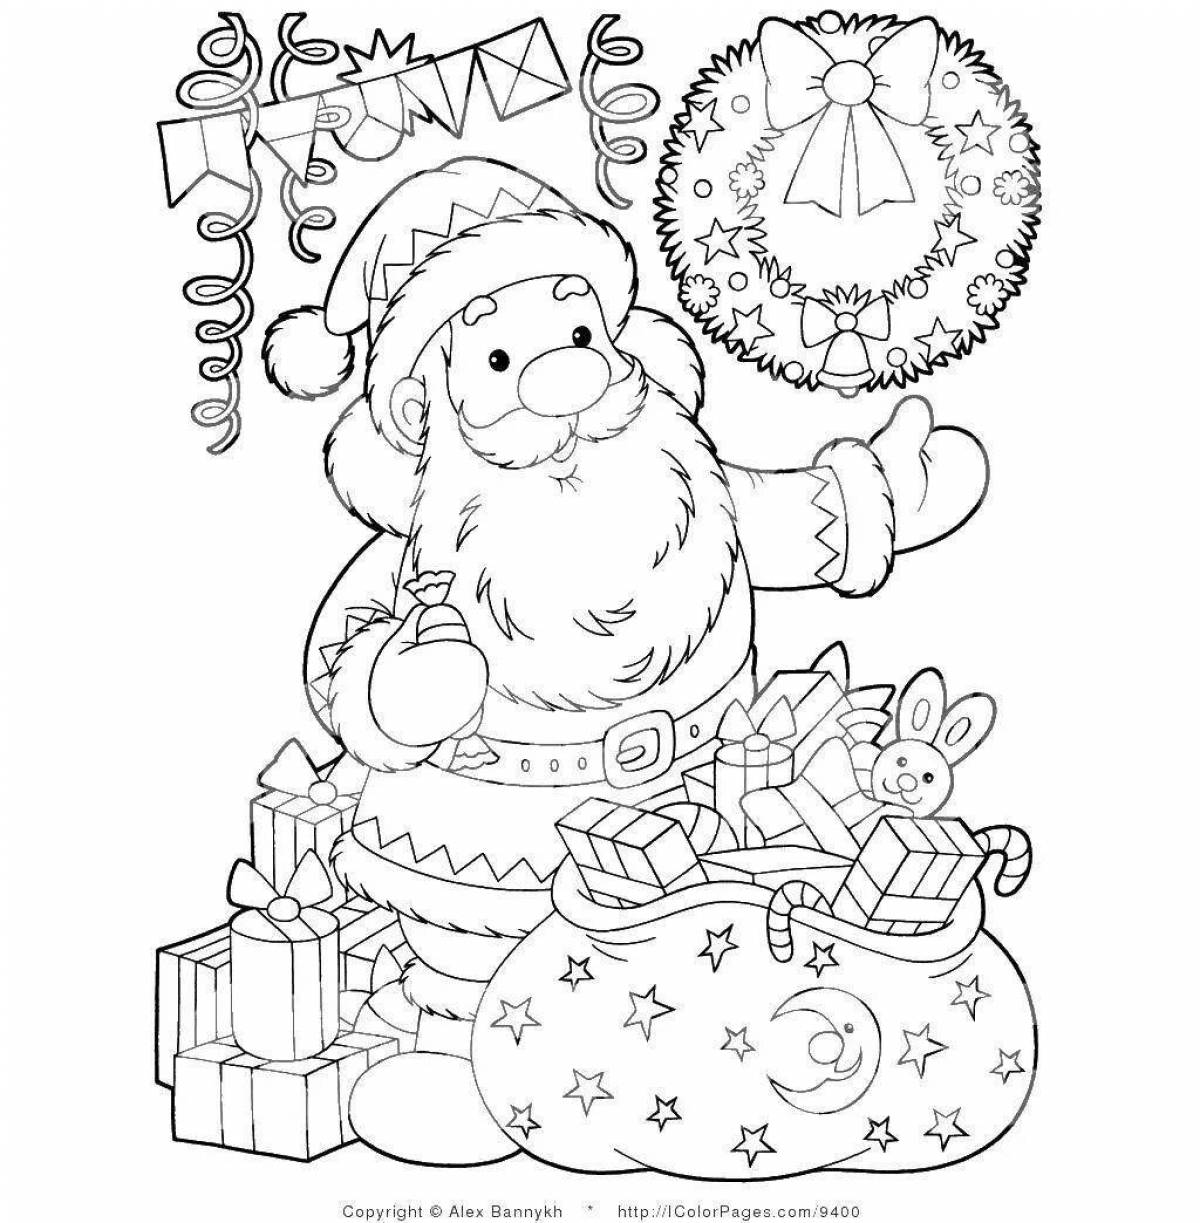 Christmas coloring book